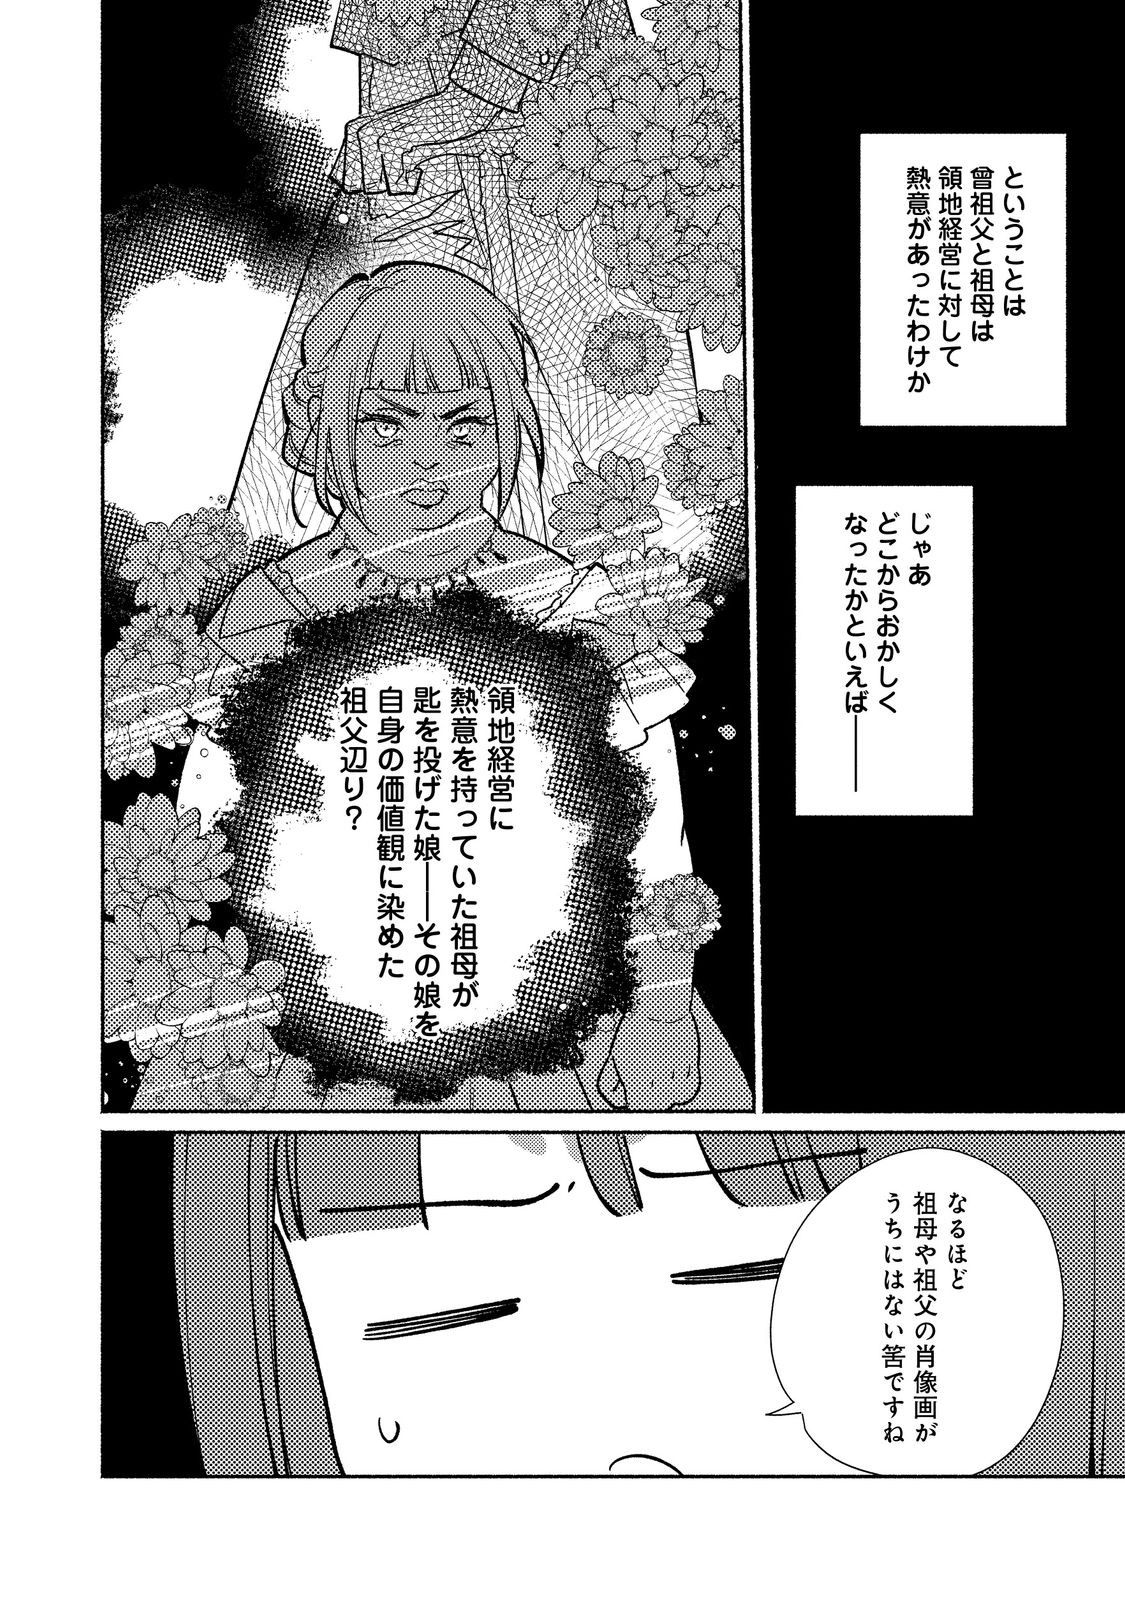 I’m the White Pig Nobleman 第25.1話 - Page 6